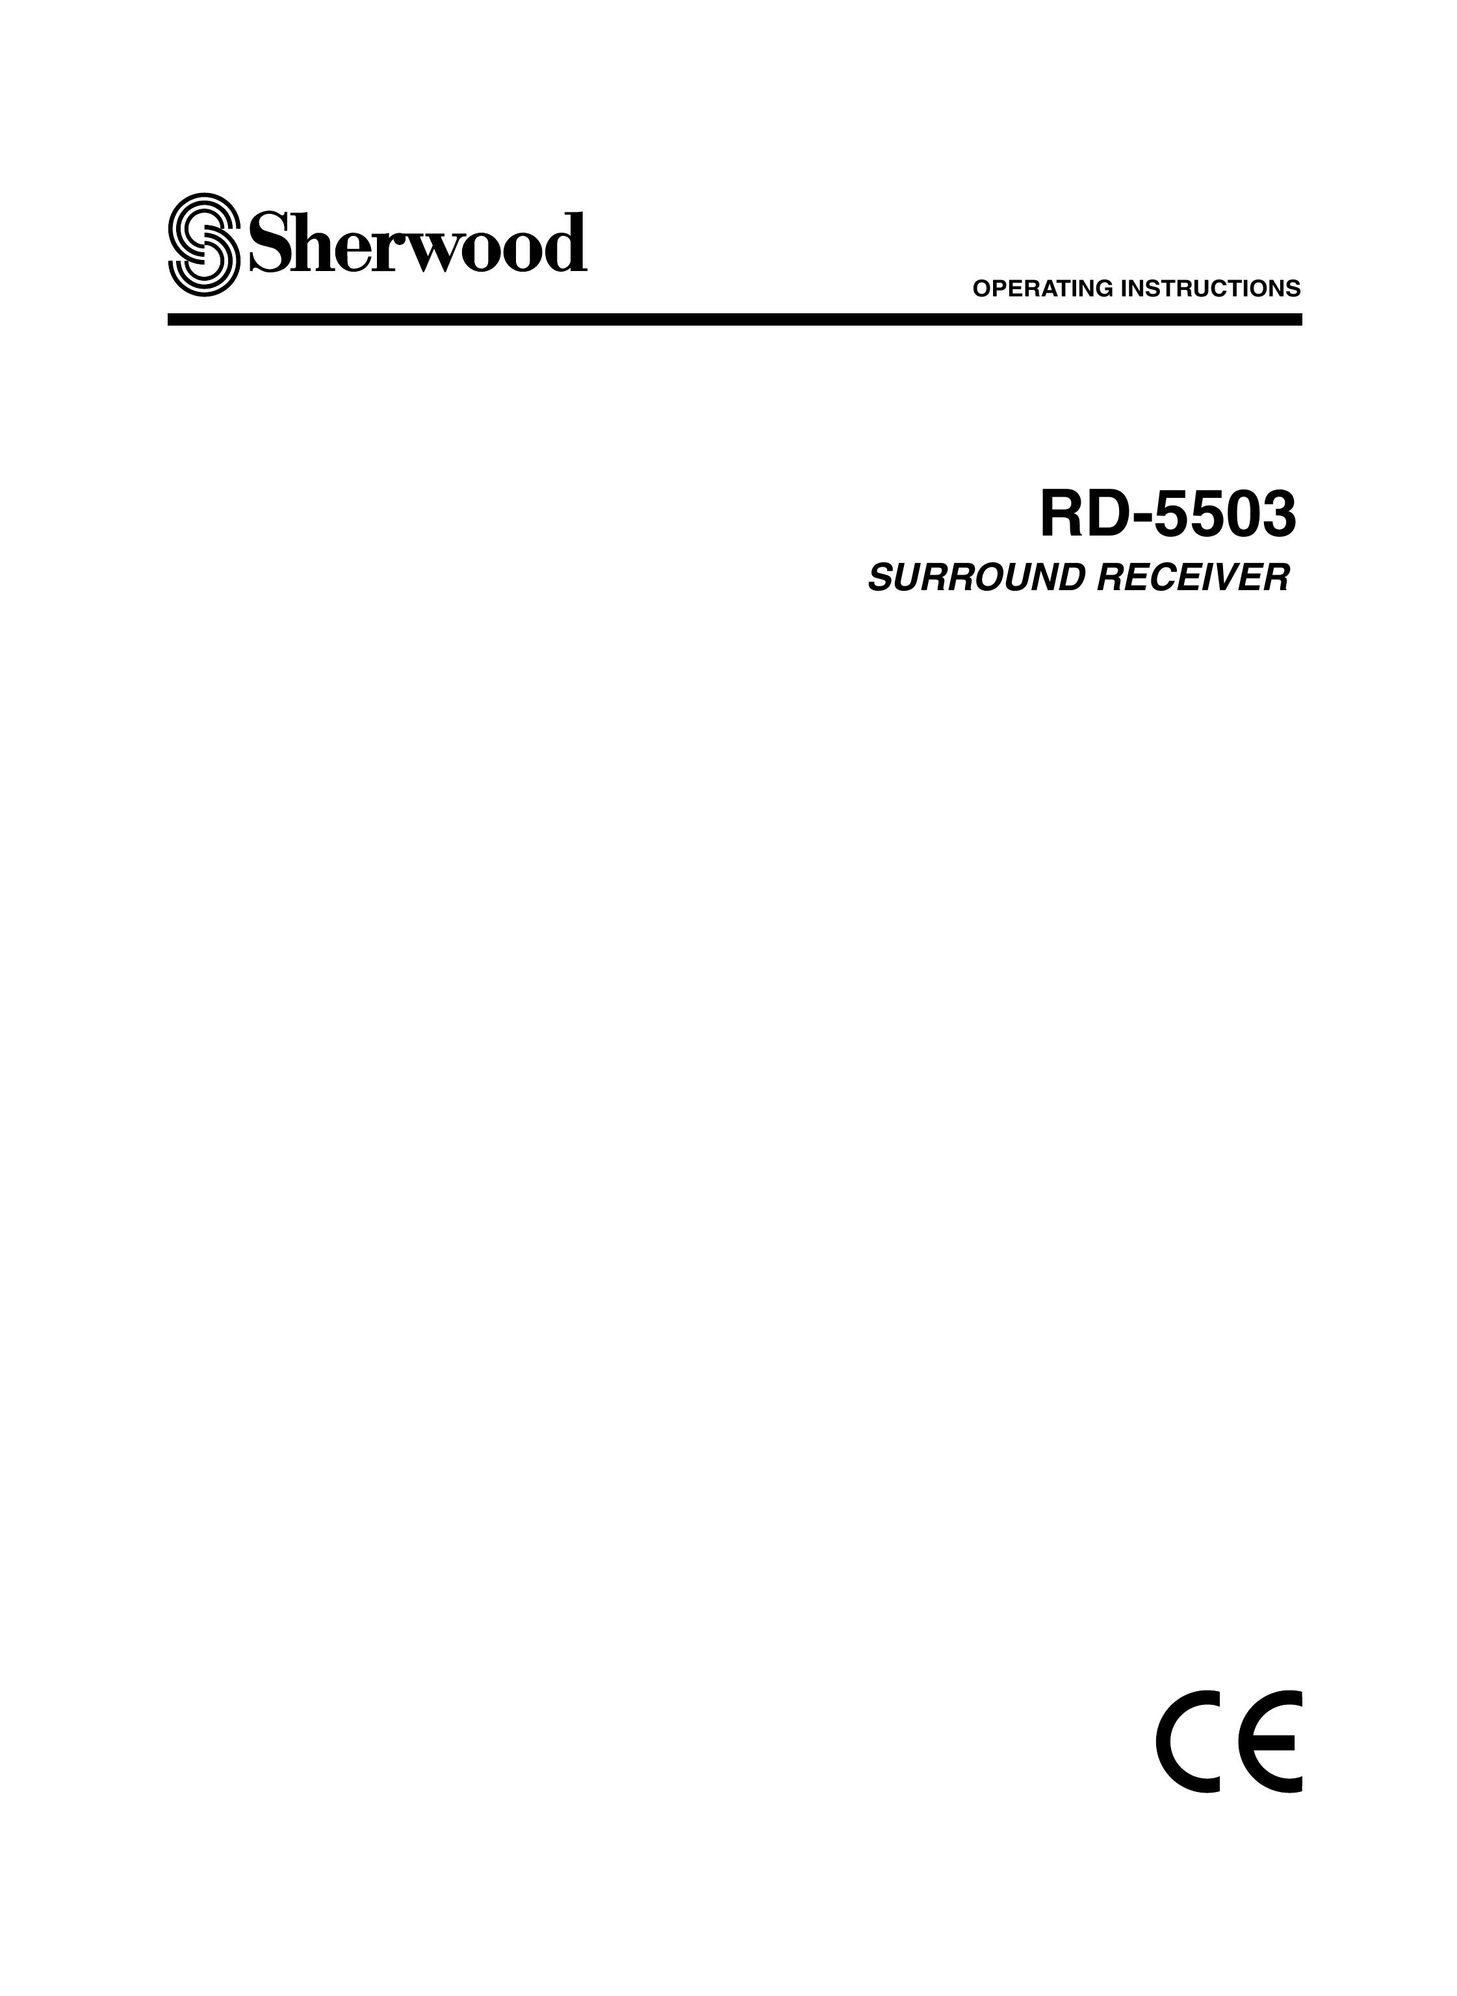 Sherwood RD-5503 Stereo Receiver User Manual